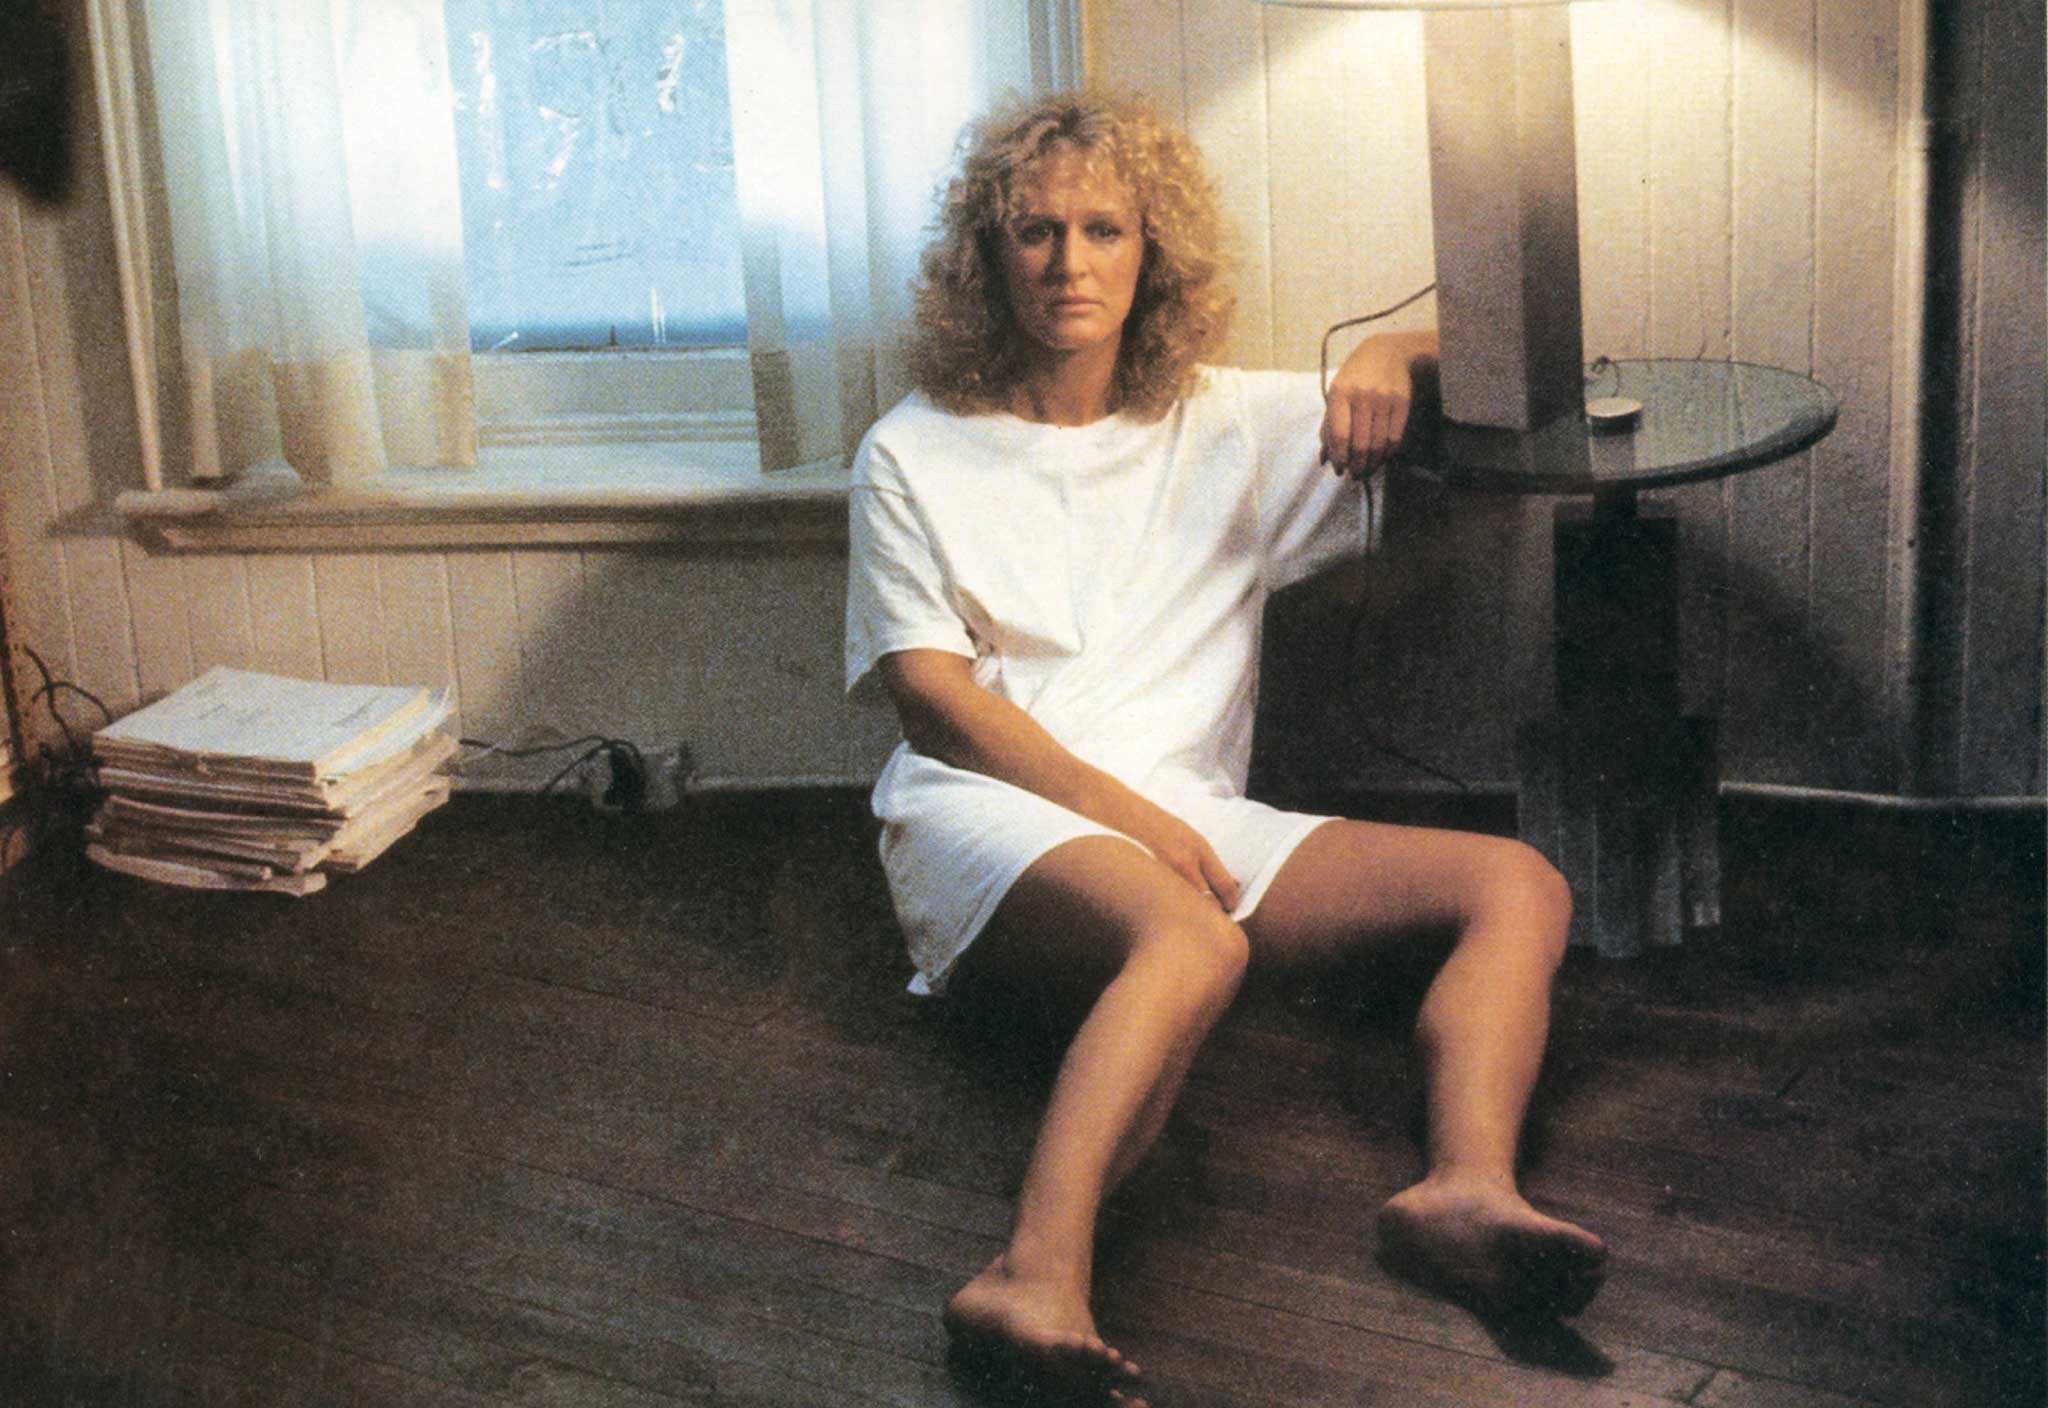 Implausibly dramatic: Glenn Close from the film 'Fatal Attraction', to which this book is compared